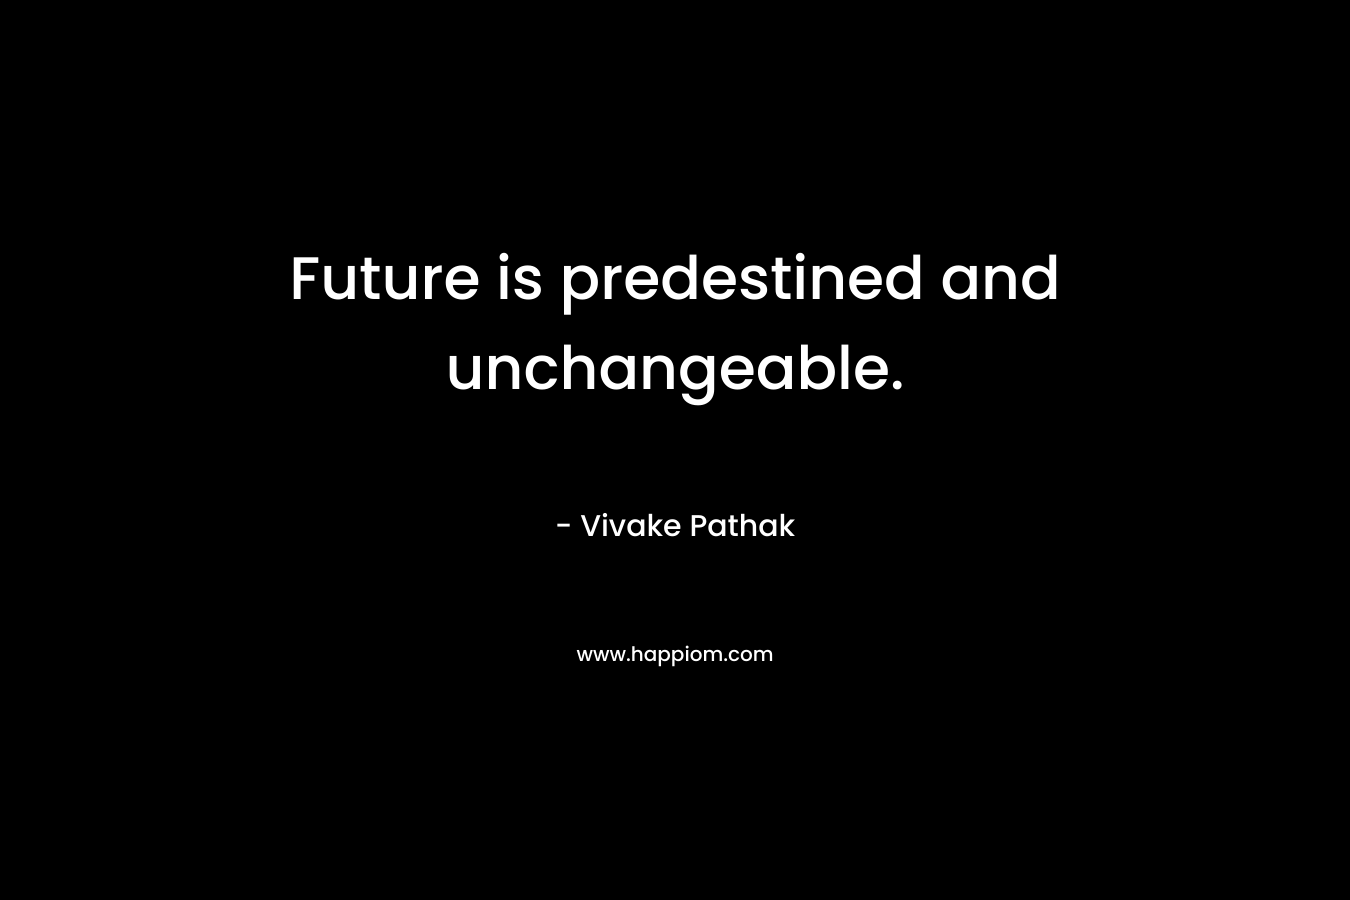 Future is predestined and unchangeable.